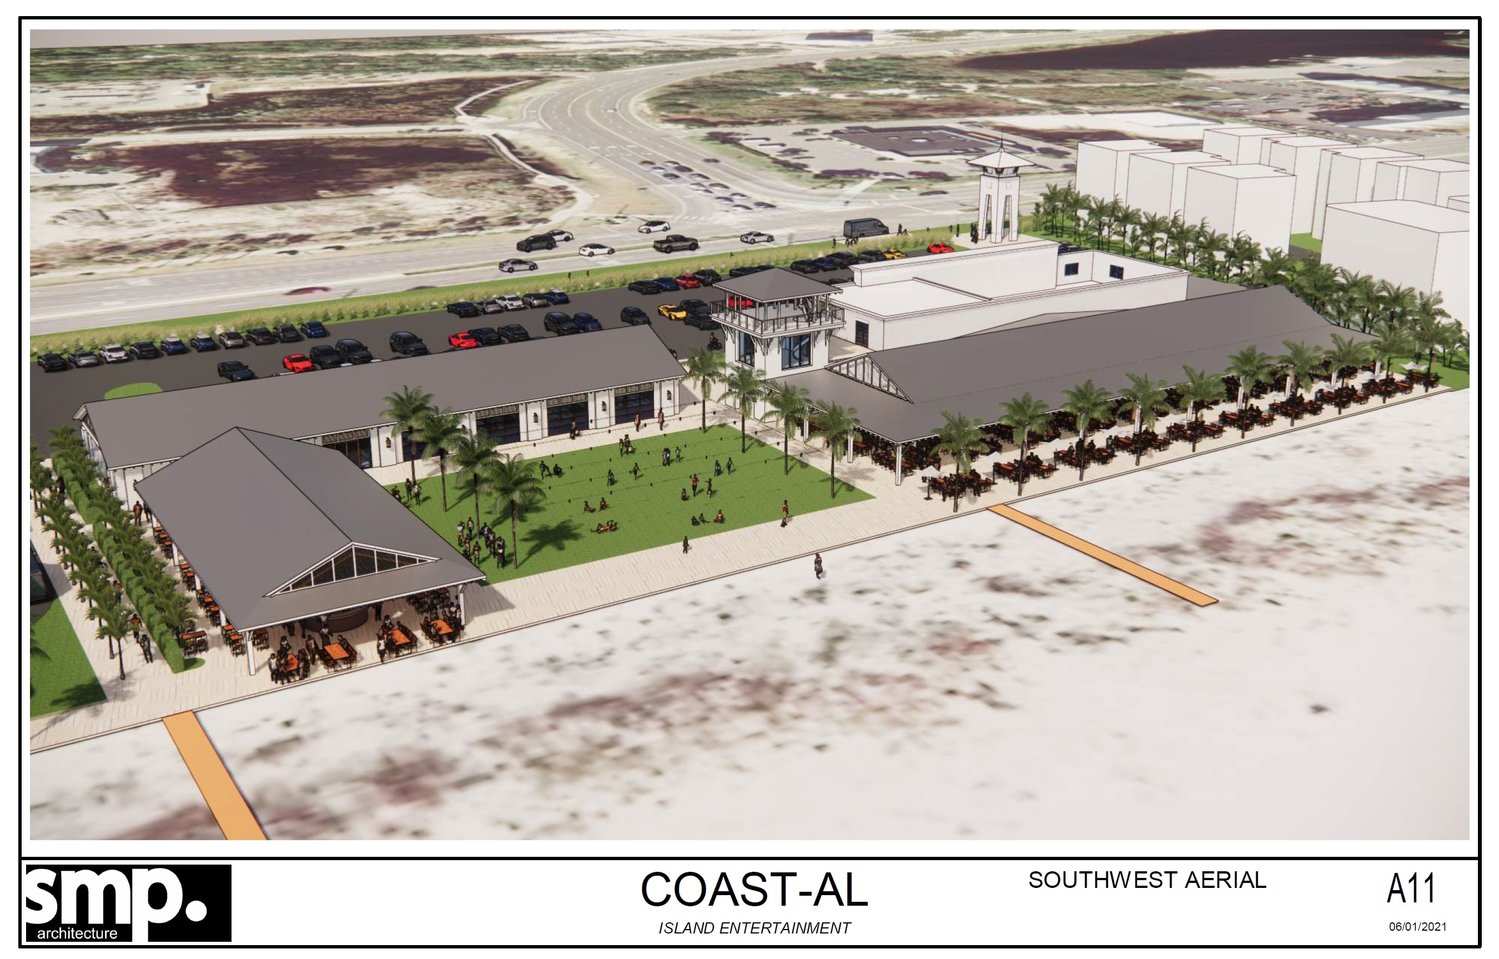 The City of Orange Beach finalized the historic purchase of over 4 acres of beachfront property for city residents. This move is part of a public-private collaboration between the City and Orange Beach Land Company, LLC (OBLC), which is owned by Flora-Bama co-owners John McInnis and Cameron Price.